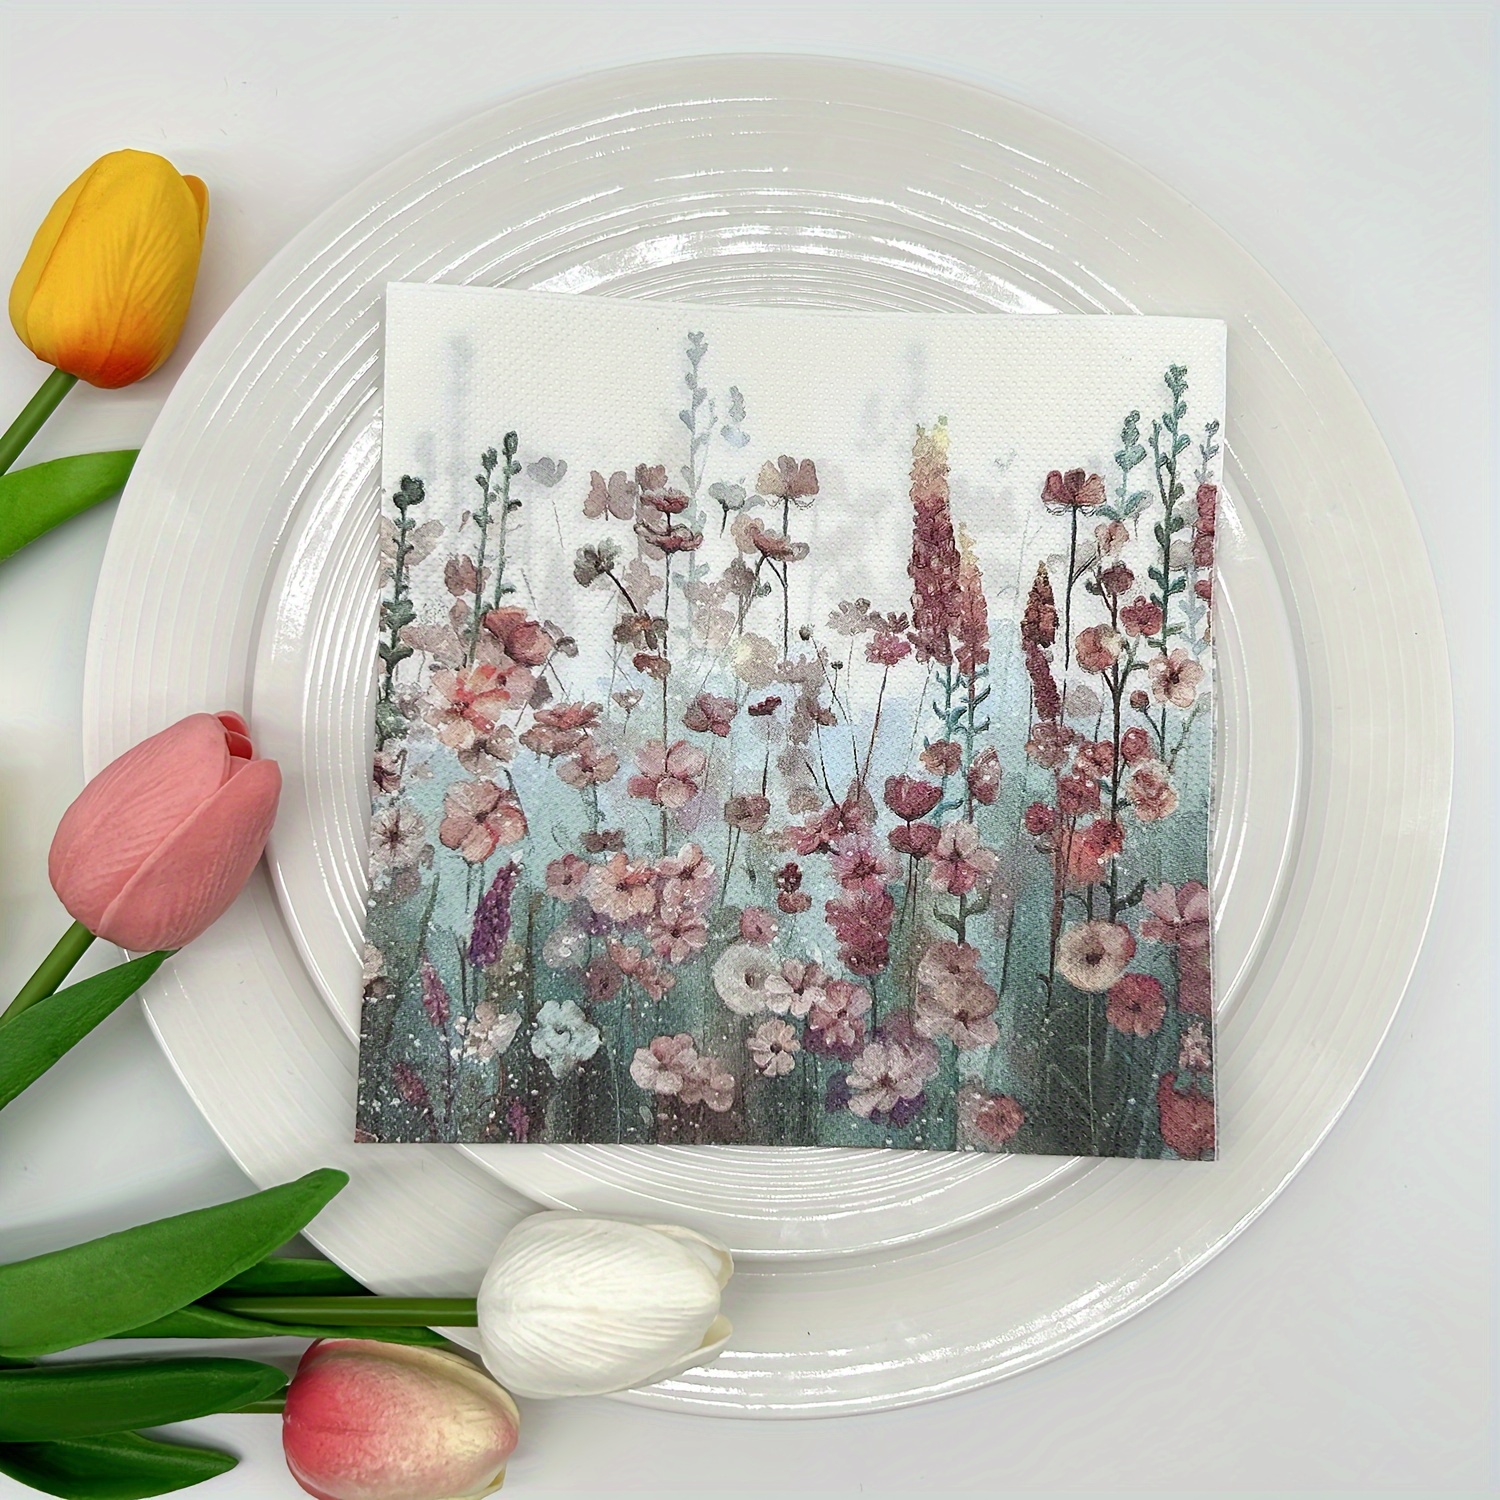 

Set, Floral Printed 2-ply Paper Napkins For Weddings, Bridal Showers, And All Occasions, Disposable Square Napkins For Spring, Summer, Fall, Winter Celebrations And Everyday Use